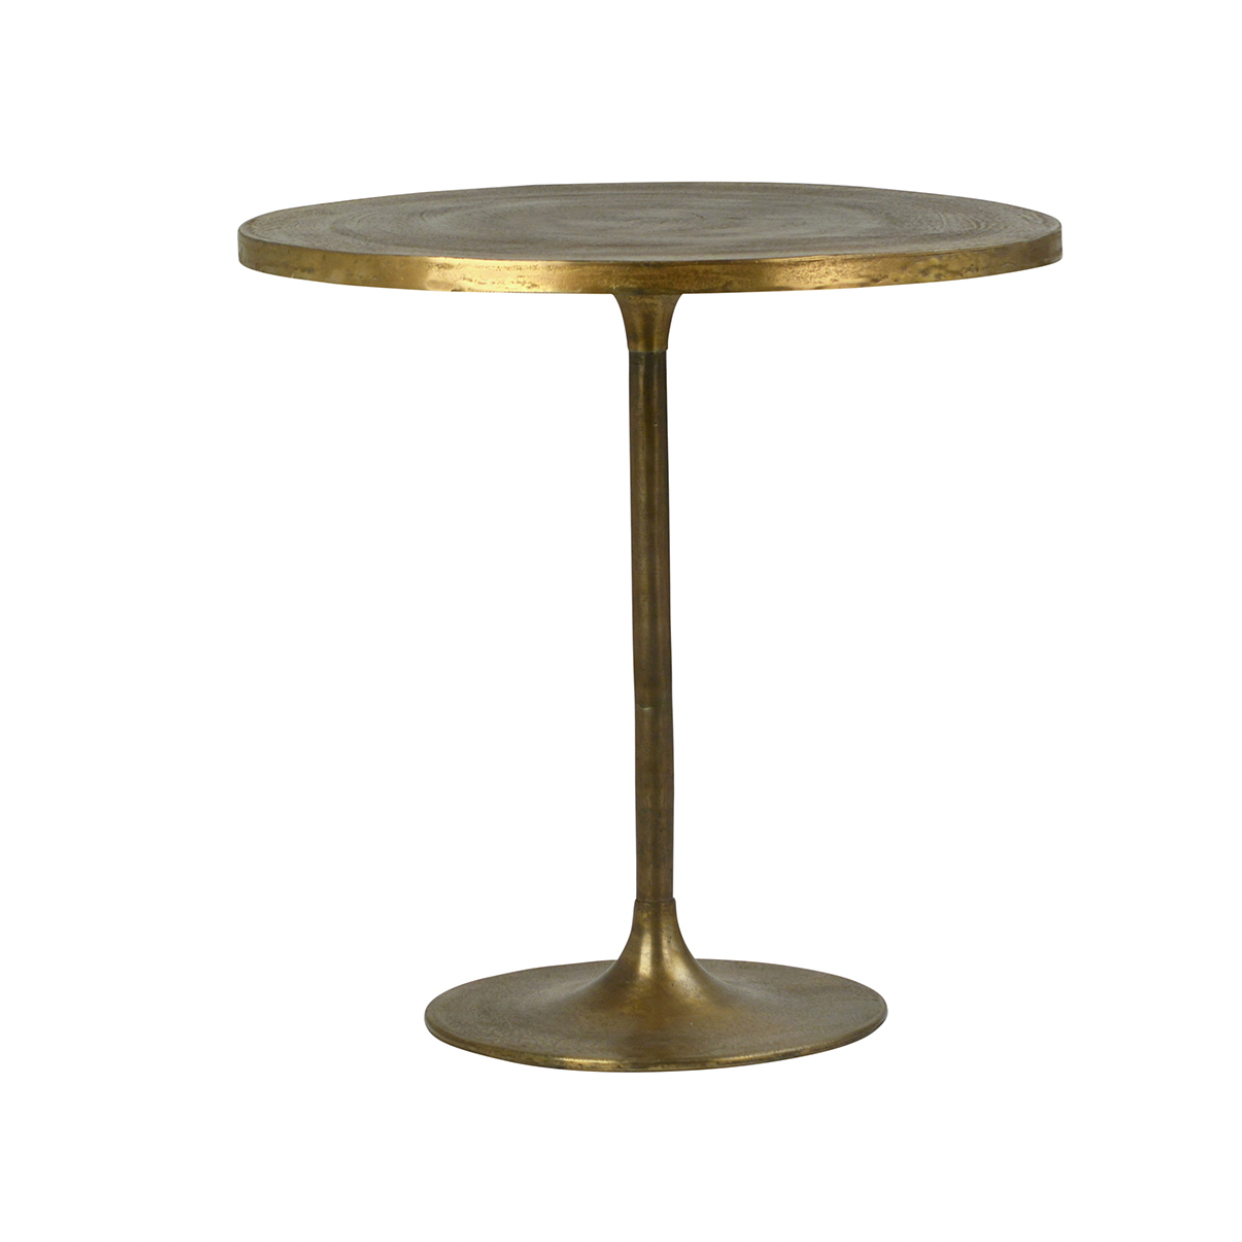 We love the antique feel the Heviz Bistro Table gives to a room. This bistro style dining table is perfectly sized for a cozy nook.  ALUMINUM, BRASS ANTIQUE TOP THICKNESS 1" BASE 18" Size: 31"l x 31"d x 30"h